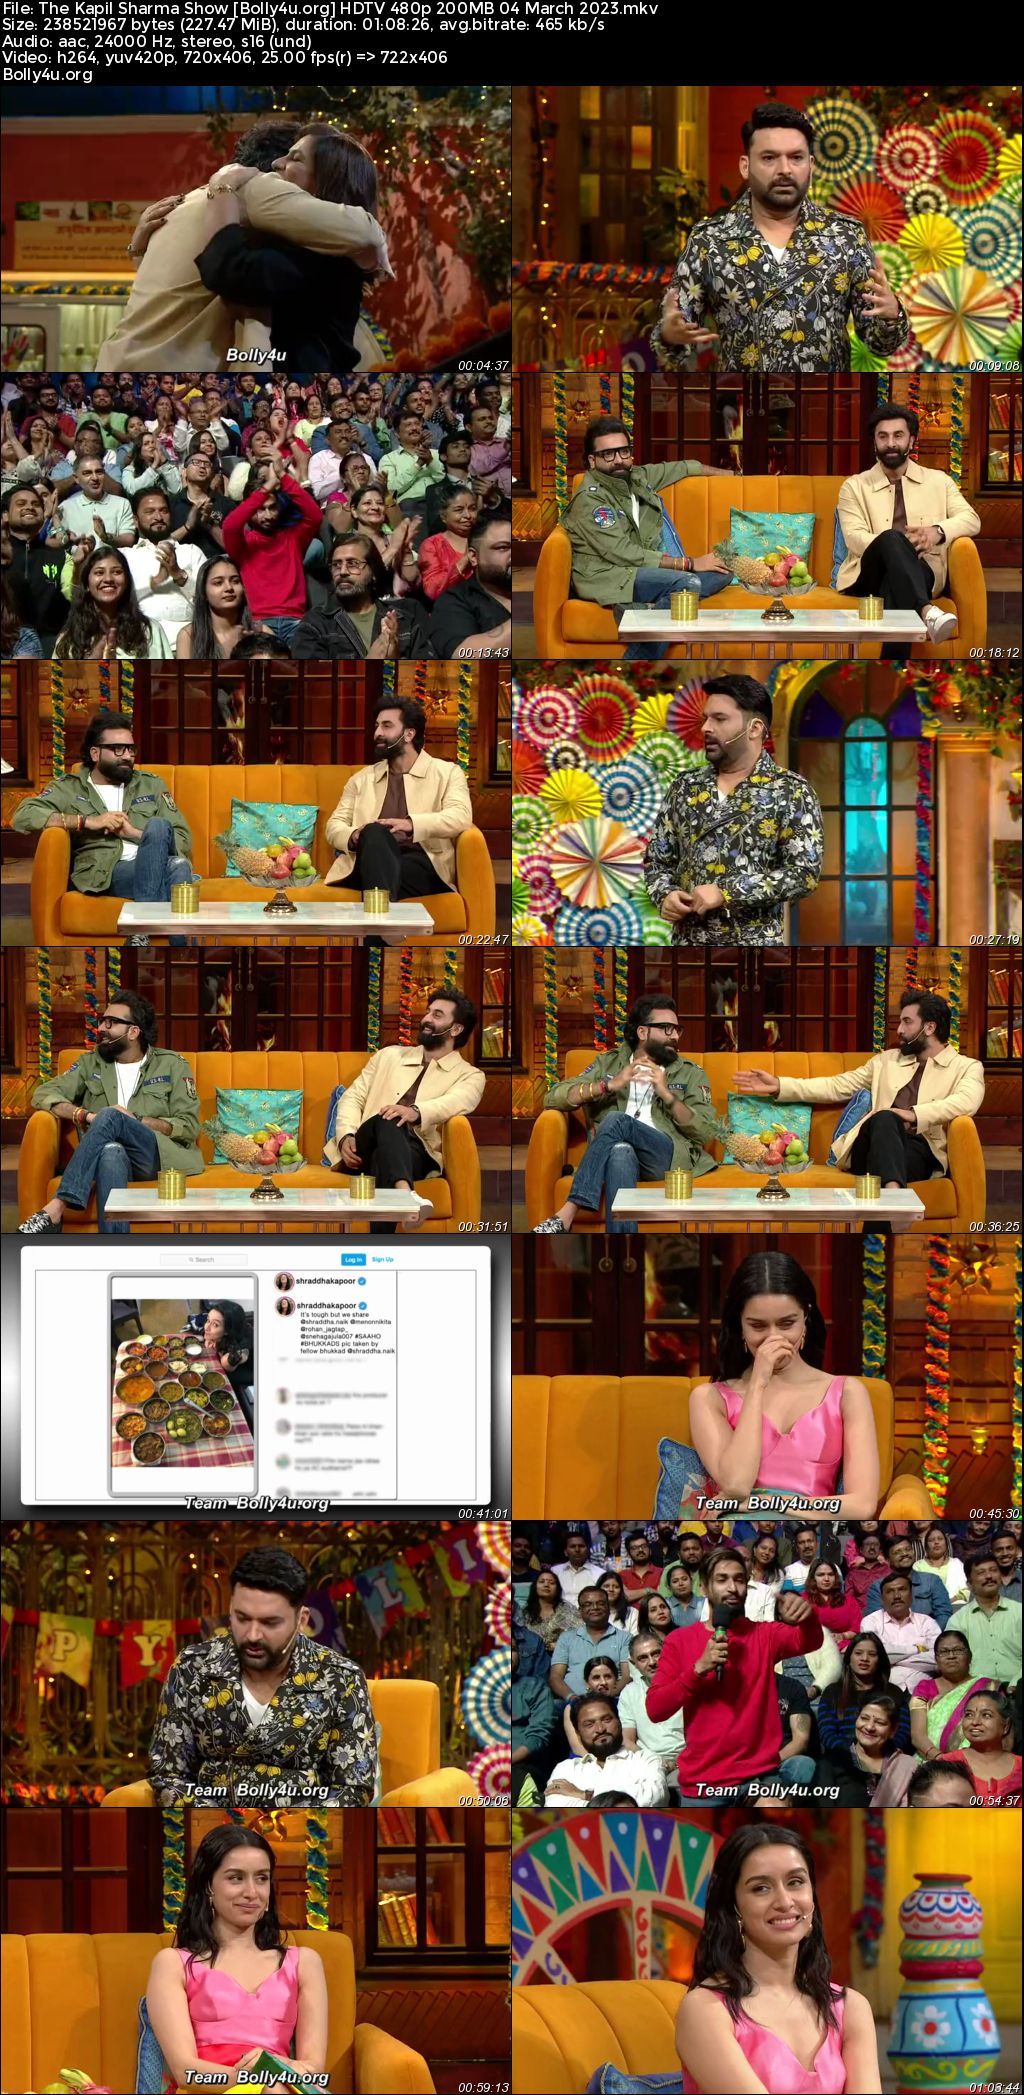 The Kapil Sharma Show HDTV 480p 200MB 04 March 2023 Download